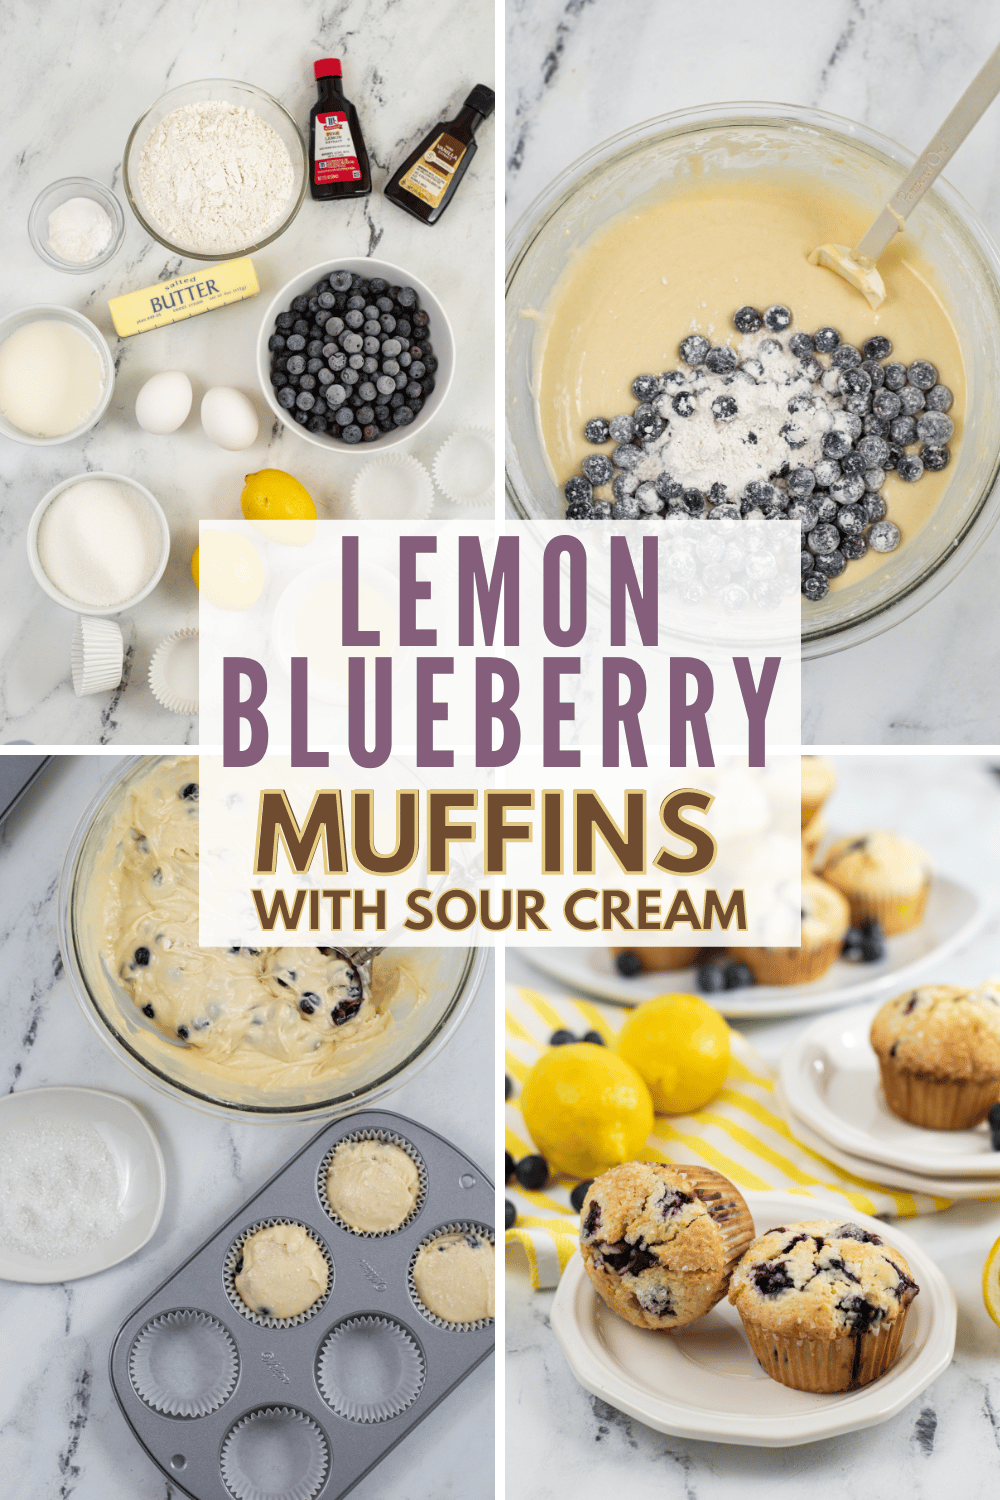 Lemon Blueberry Muffins with Sour Cream are light, fluffy, and full of blueberries and lemon flavor. They’re the perfect breakfast or snack. #lemonblueberrymuffins #breakfast #snack #recipe via @wondermomwannab